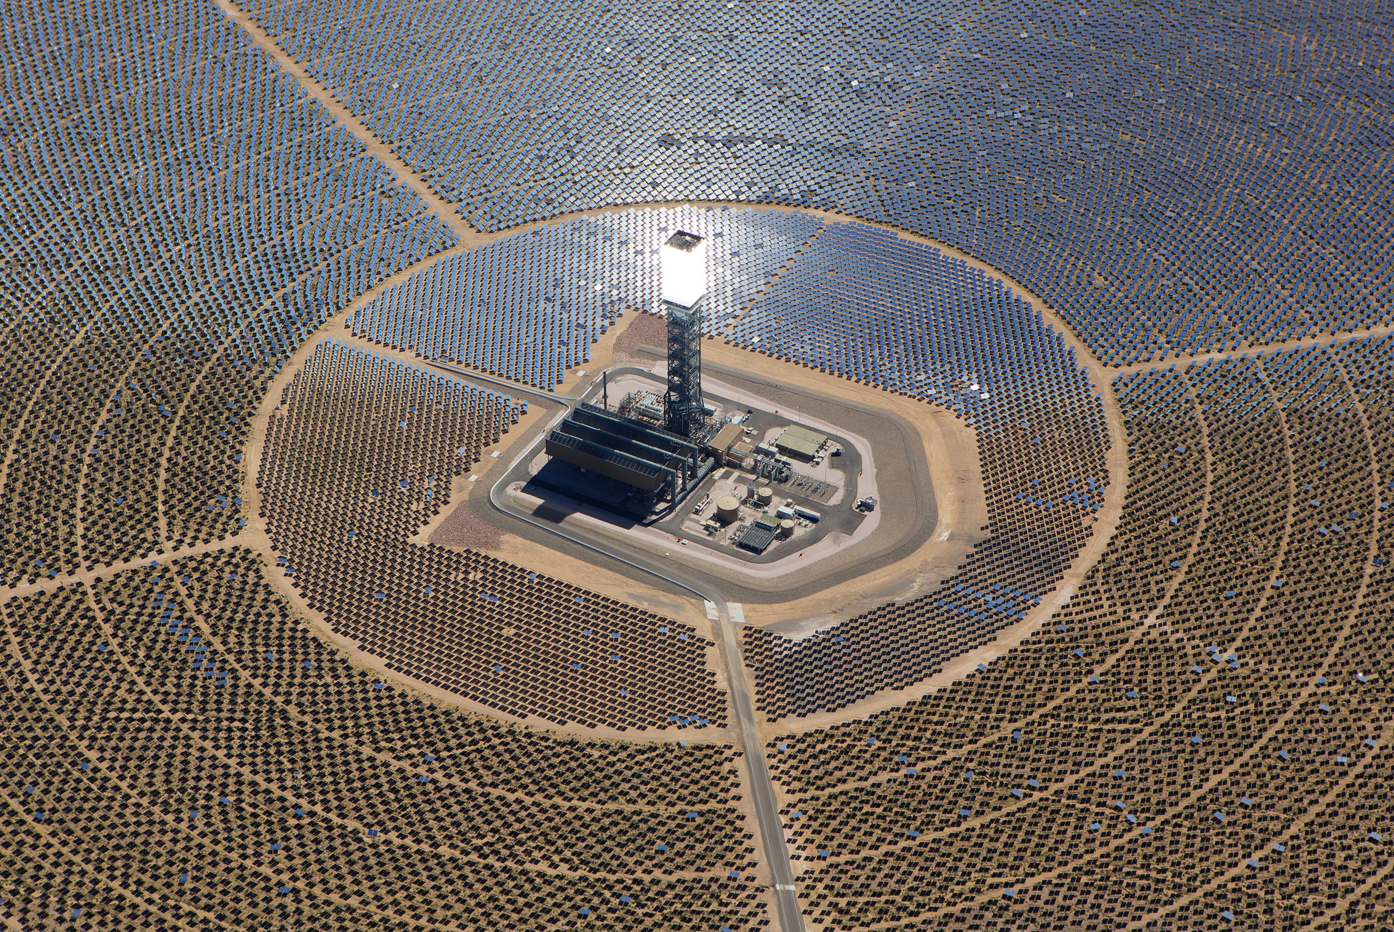  is a concentrated solar thermal plant in the California Mojave Desert